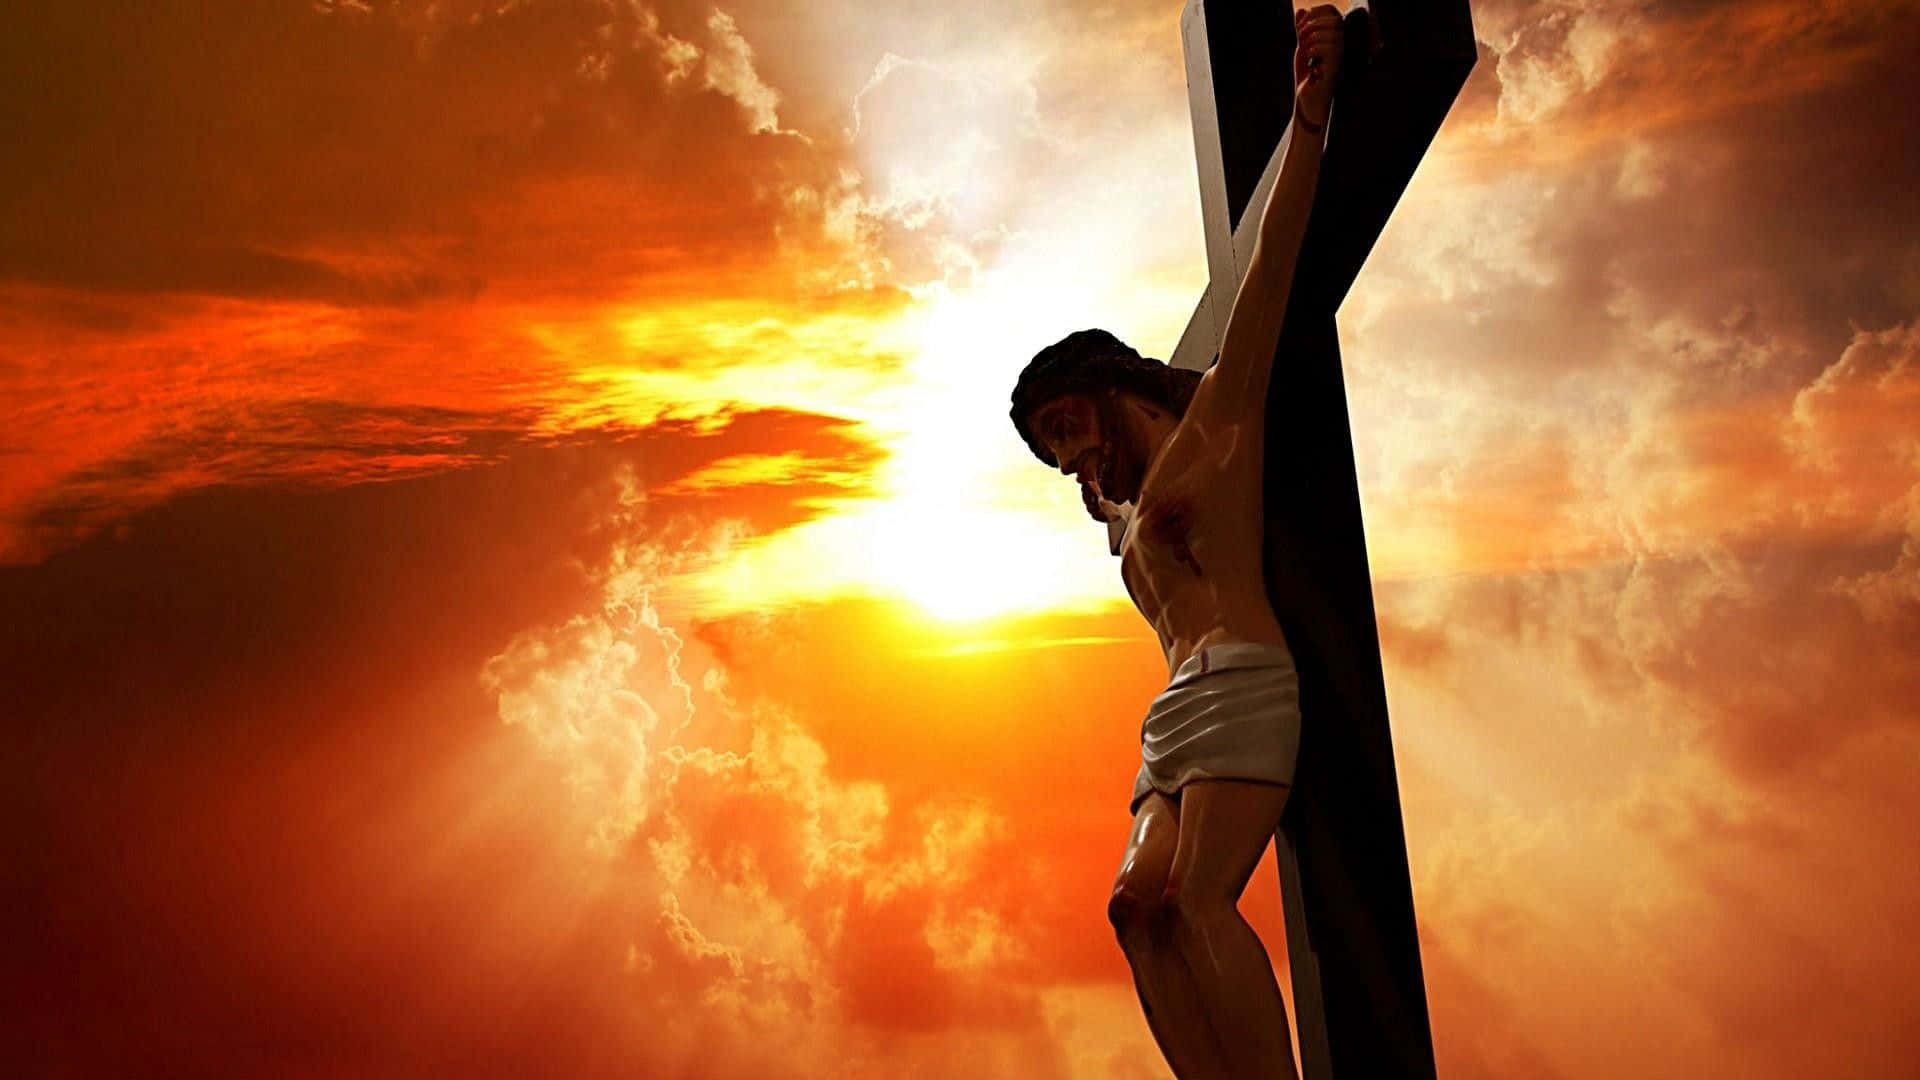 Jesus On The Cross With Bright Sunset Picture